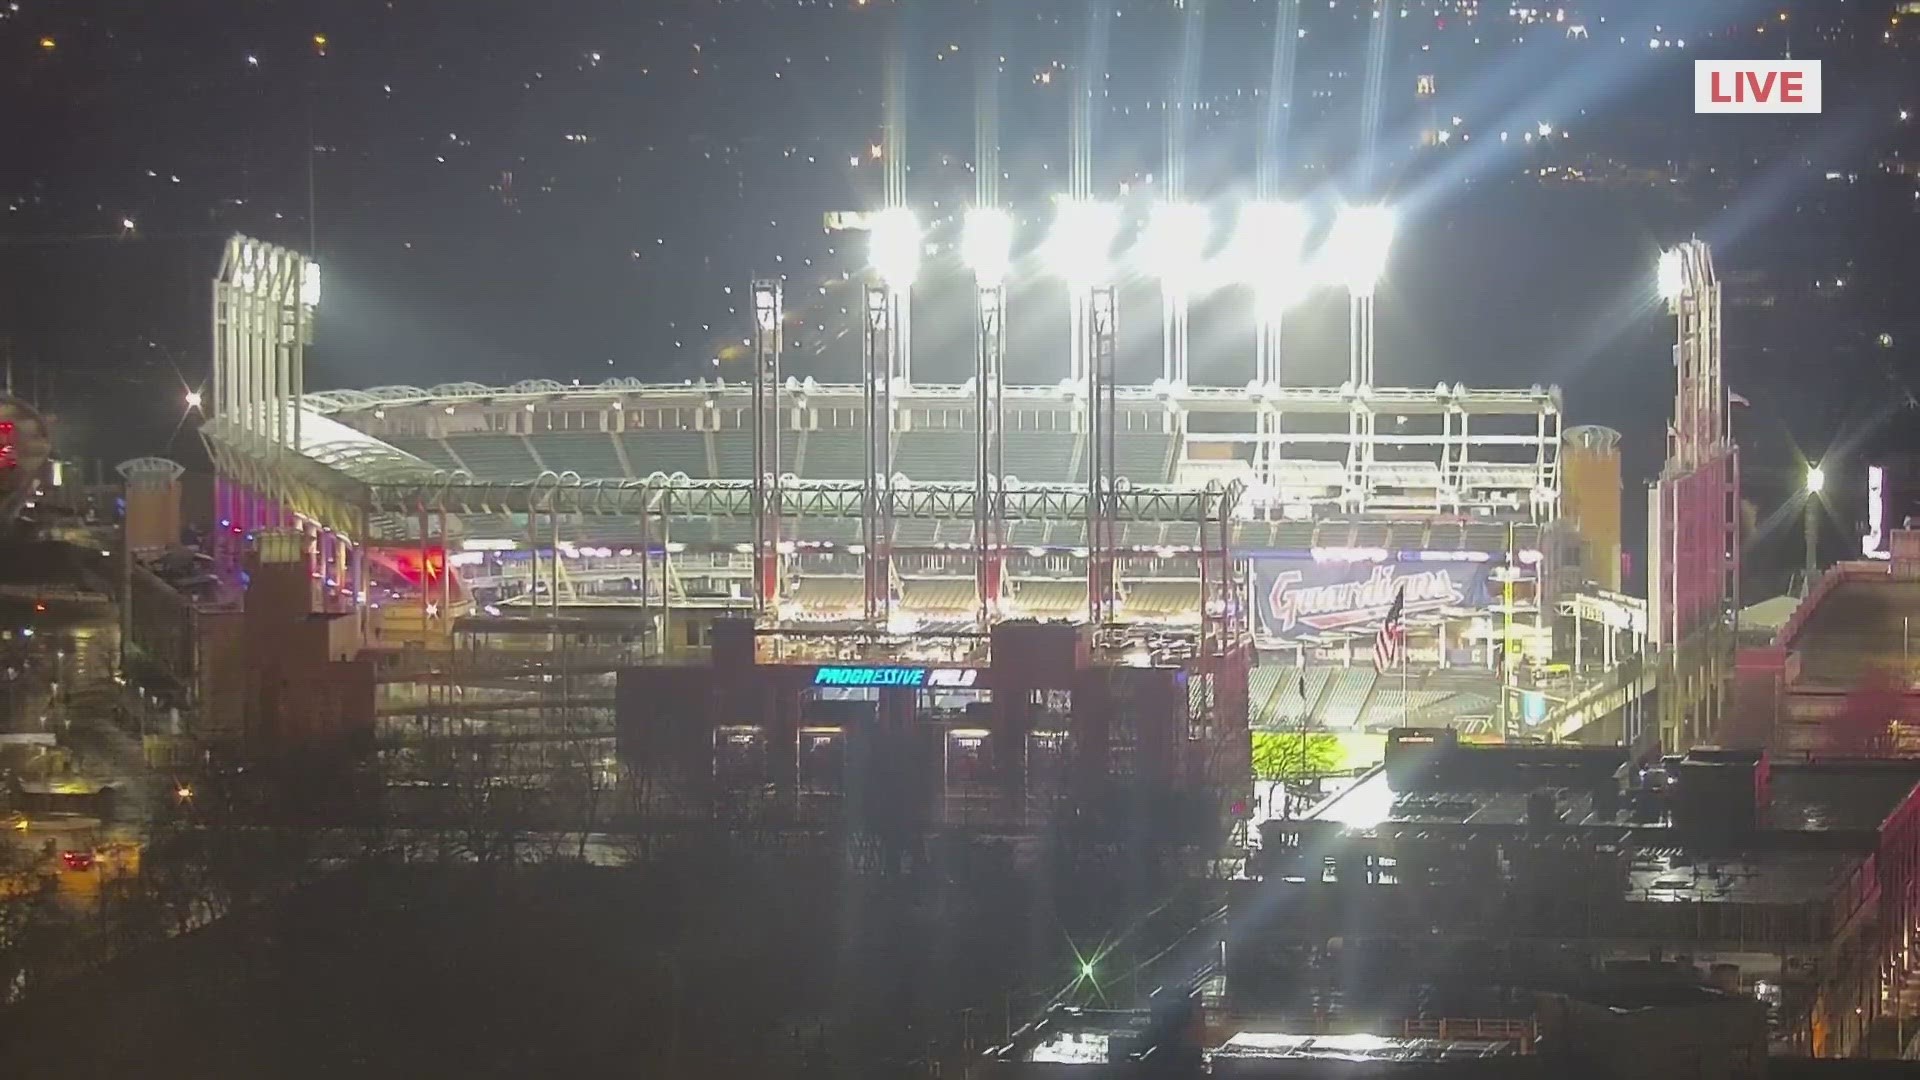 Play ball! 3News' Austin Love is giving us a sneak peek at what's new inside Progressive Field as the Cleveland Guardians prepare to host the 2024 home opener.